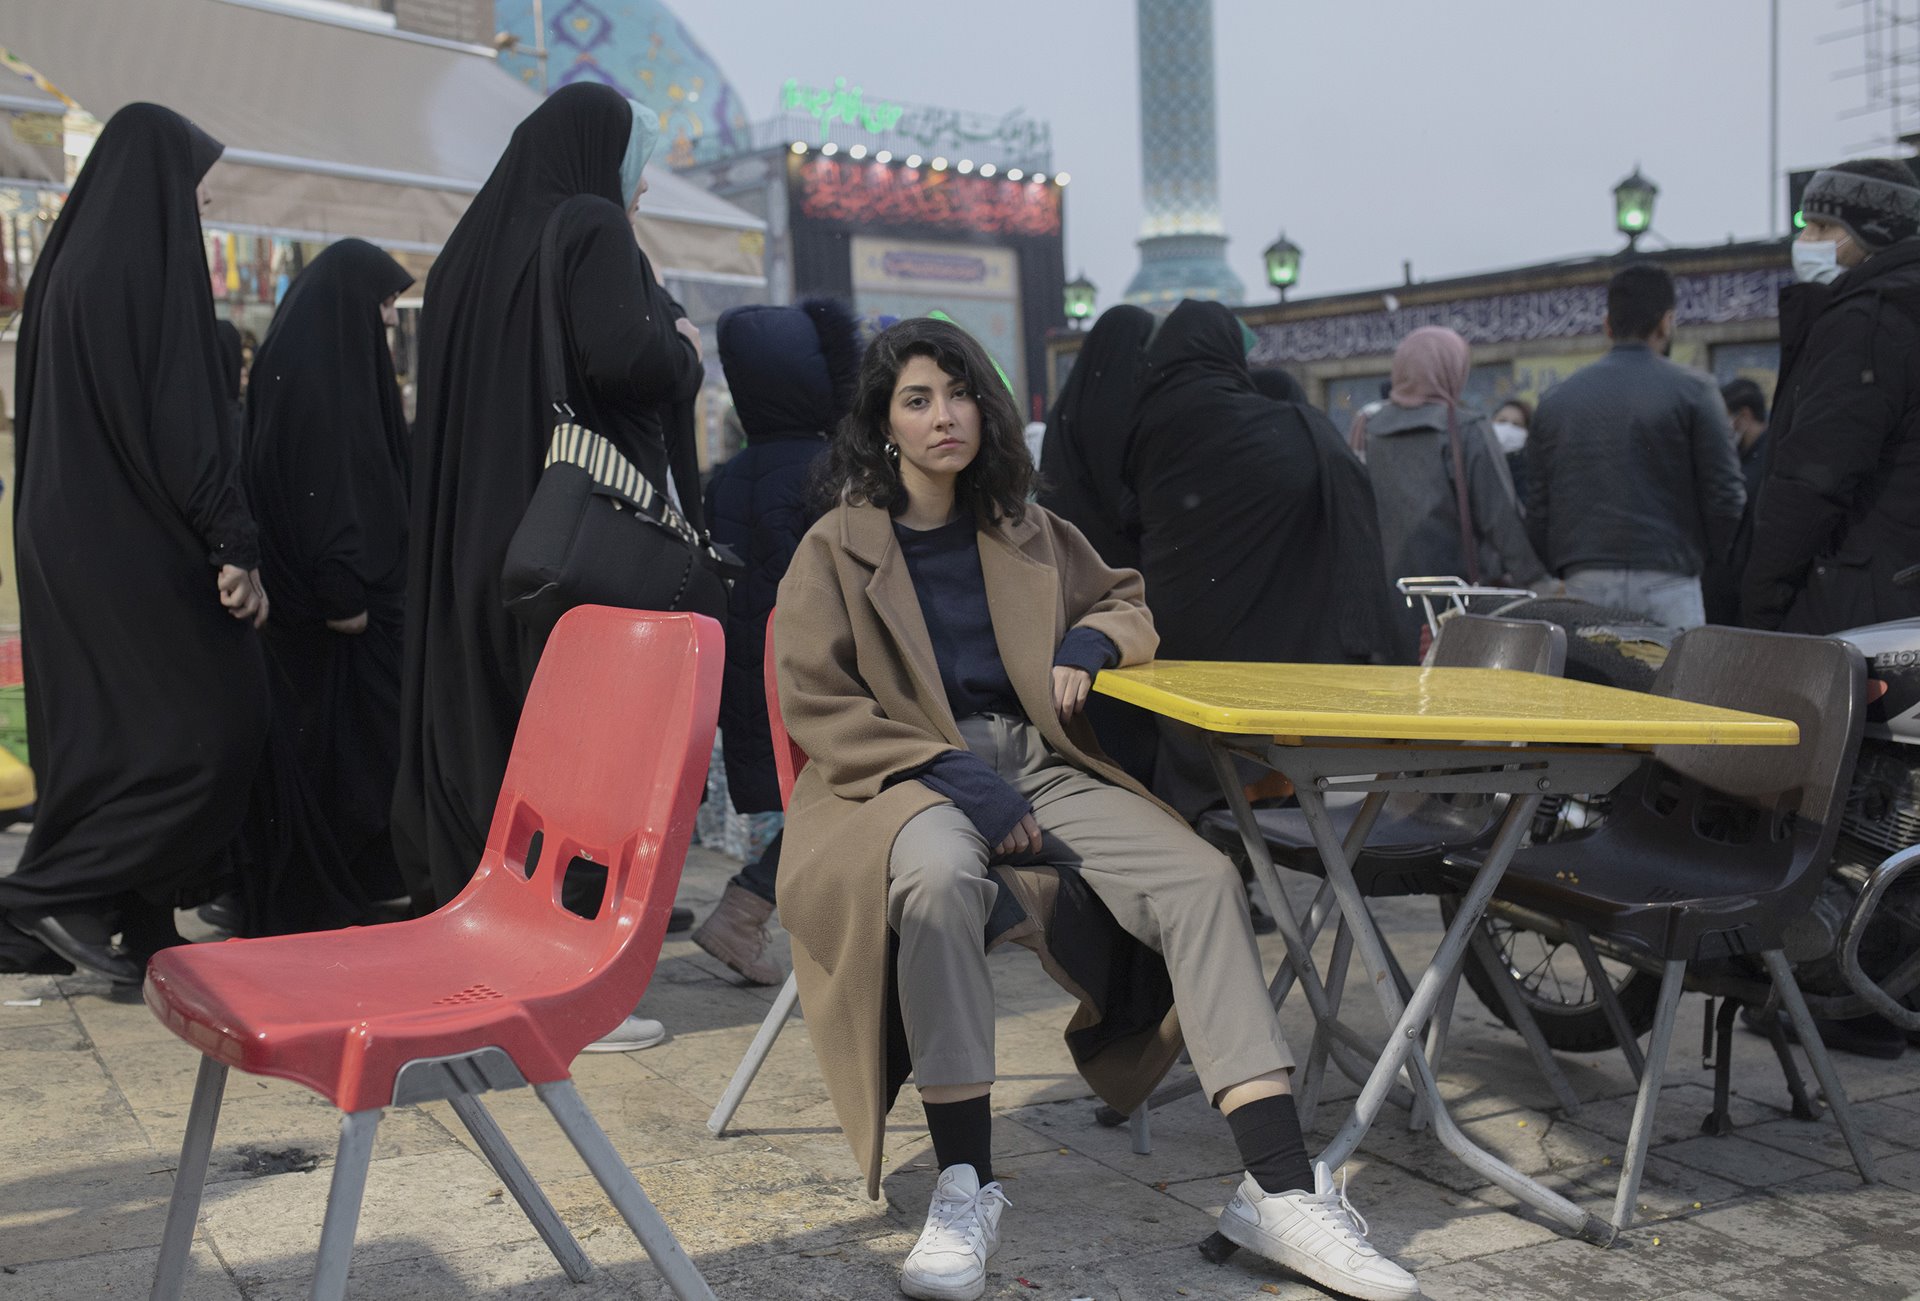 <p>An Iranian woman sits on a chair in front of a busy square in Tehran, defying the mandatory hijab law. &ldquo;A few days after Mahsa&rsquo;s death, I was walking past Keshavarz Boulevard when I saw a massive crowd of men and women, young and old, chanting a slogan that I&rsquo;ve never heard before: &lsquo;Woman, Life, Freedom&rsquo;. It enlightened me, it was moving,&rdquo; she said.</p>
